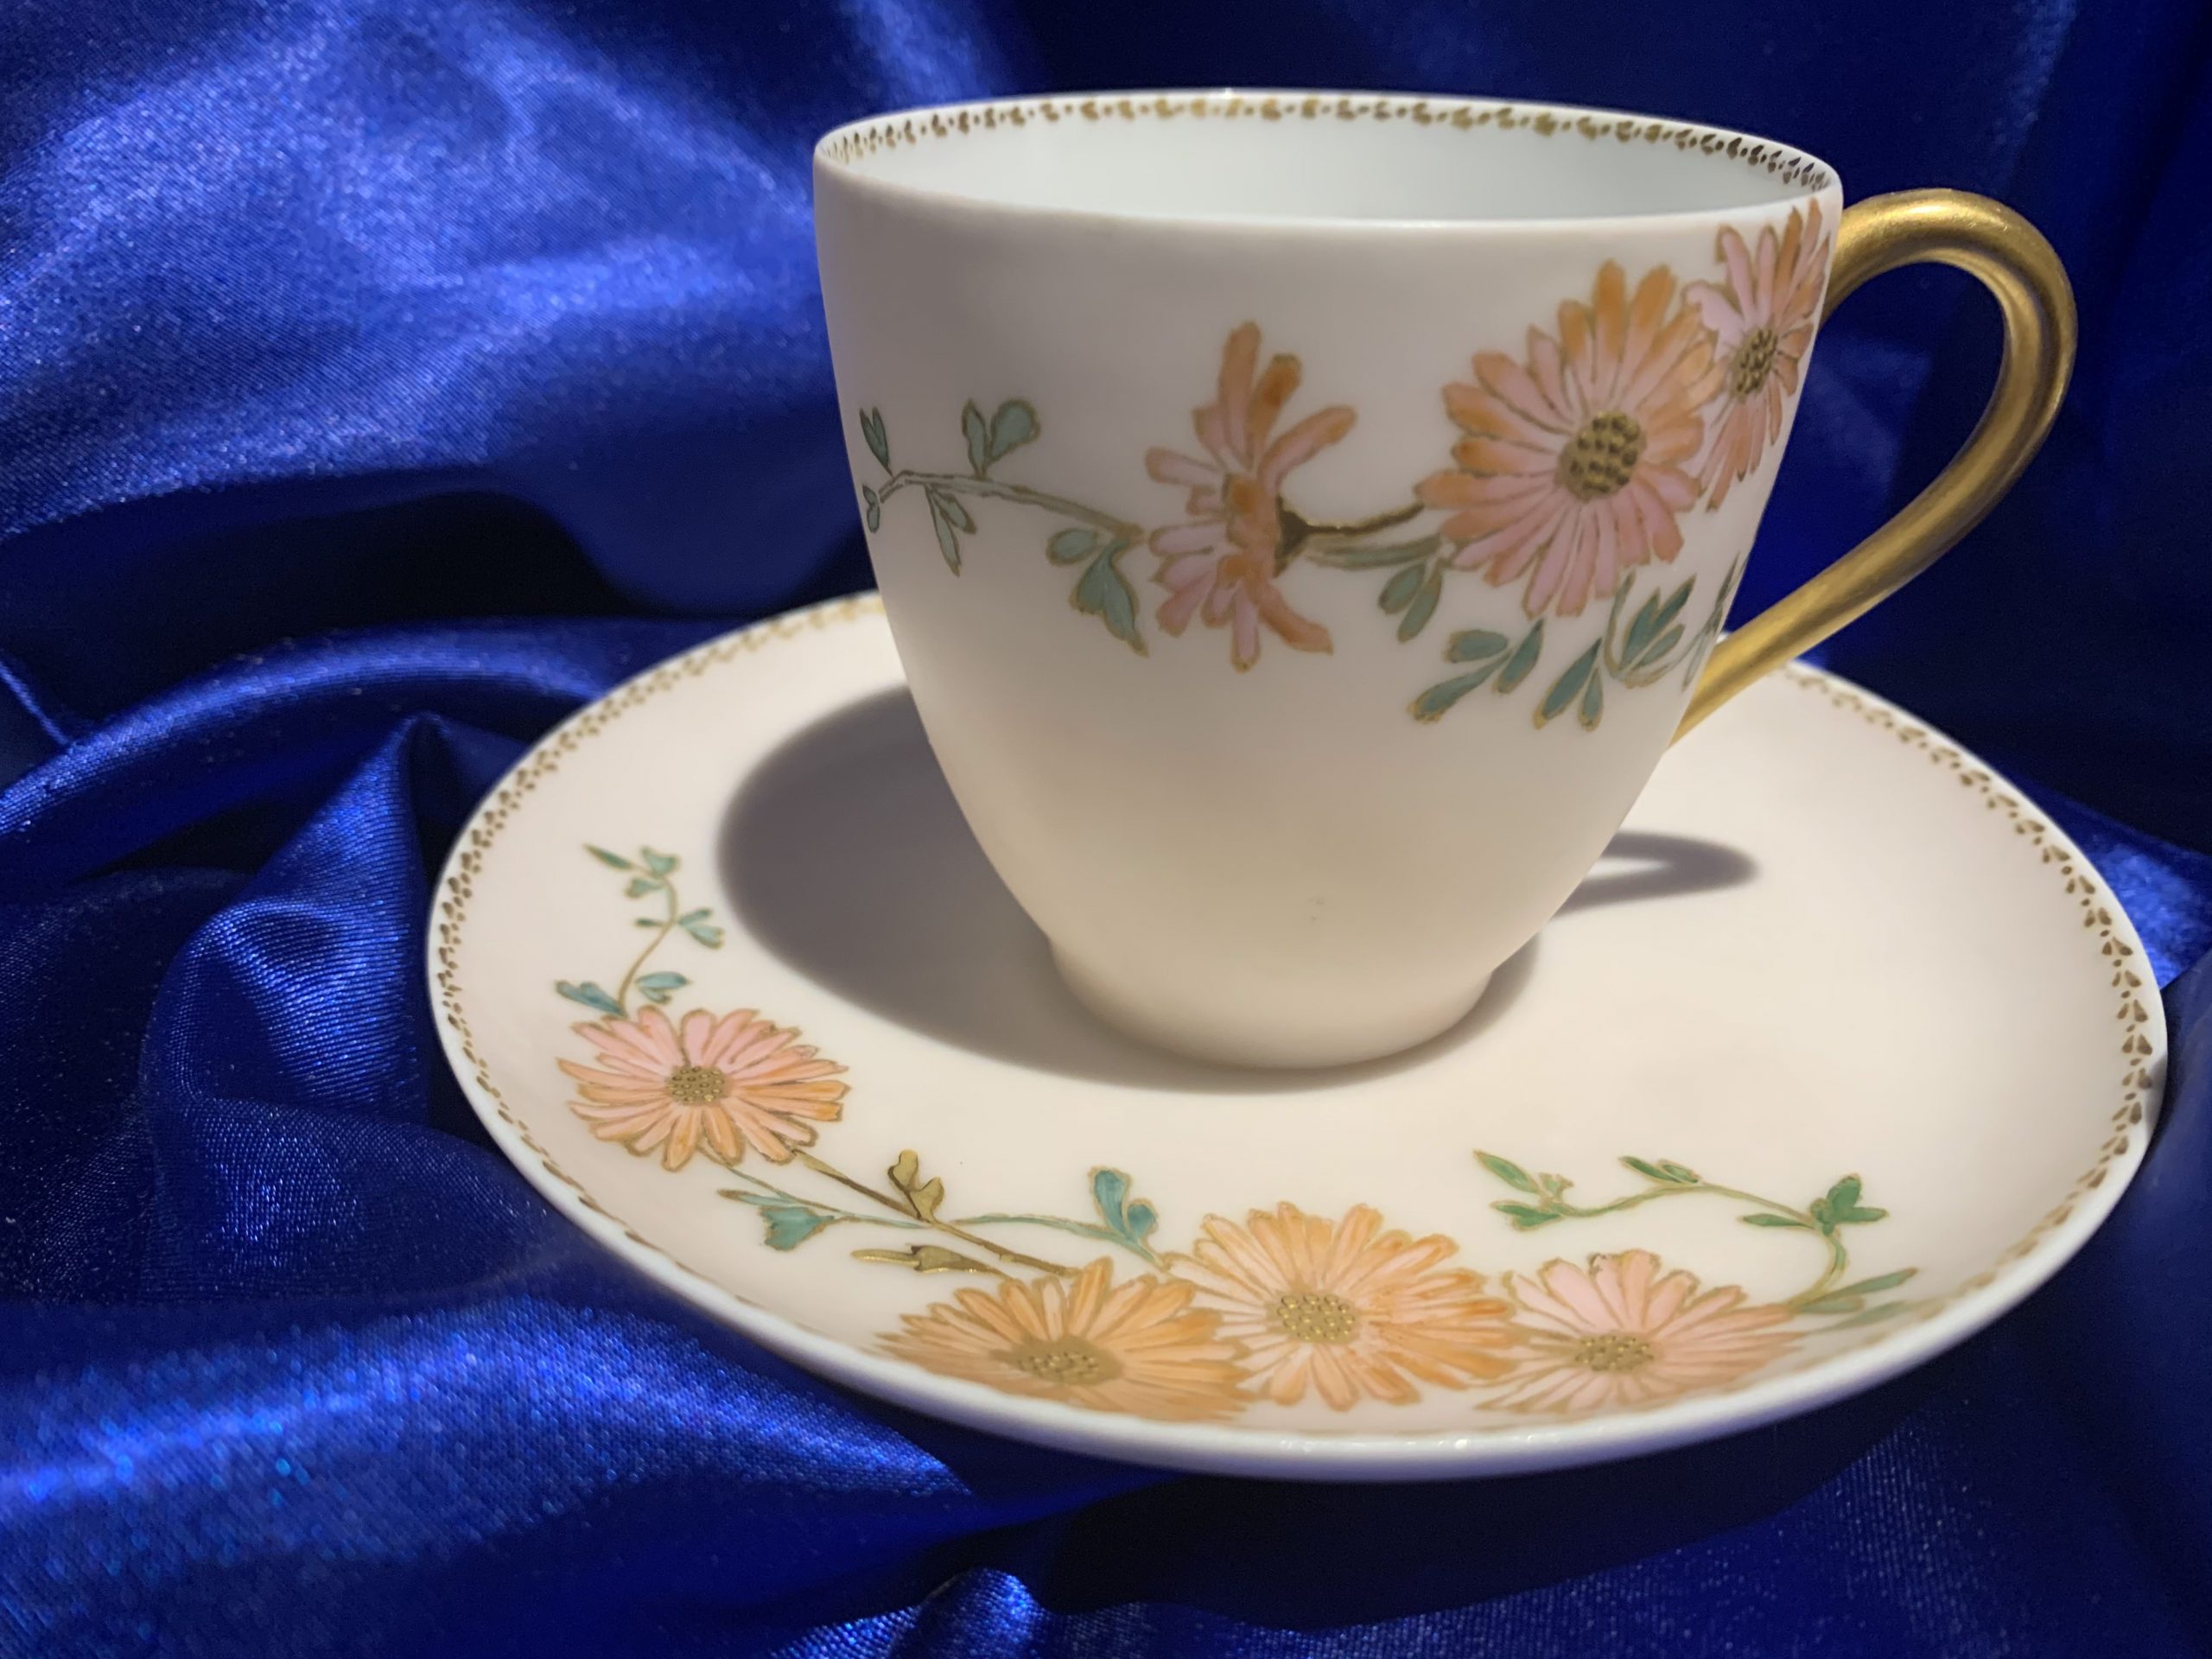 China Tea Set – Painted for the George Elliot Club by Luella Vance Phillips, a well-known China painter who lived in Hastings in the 1880s.